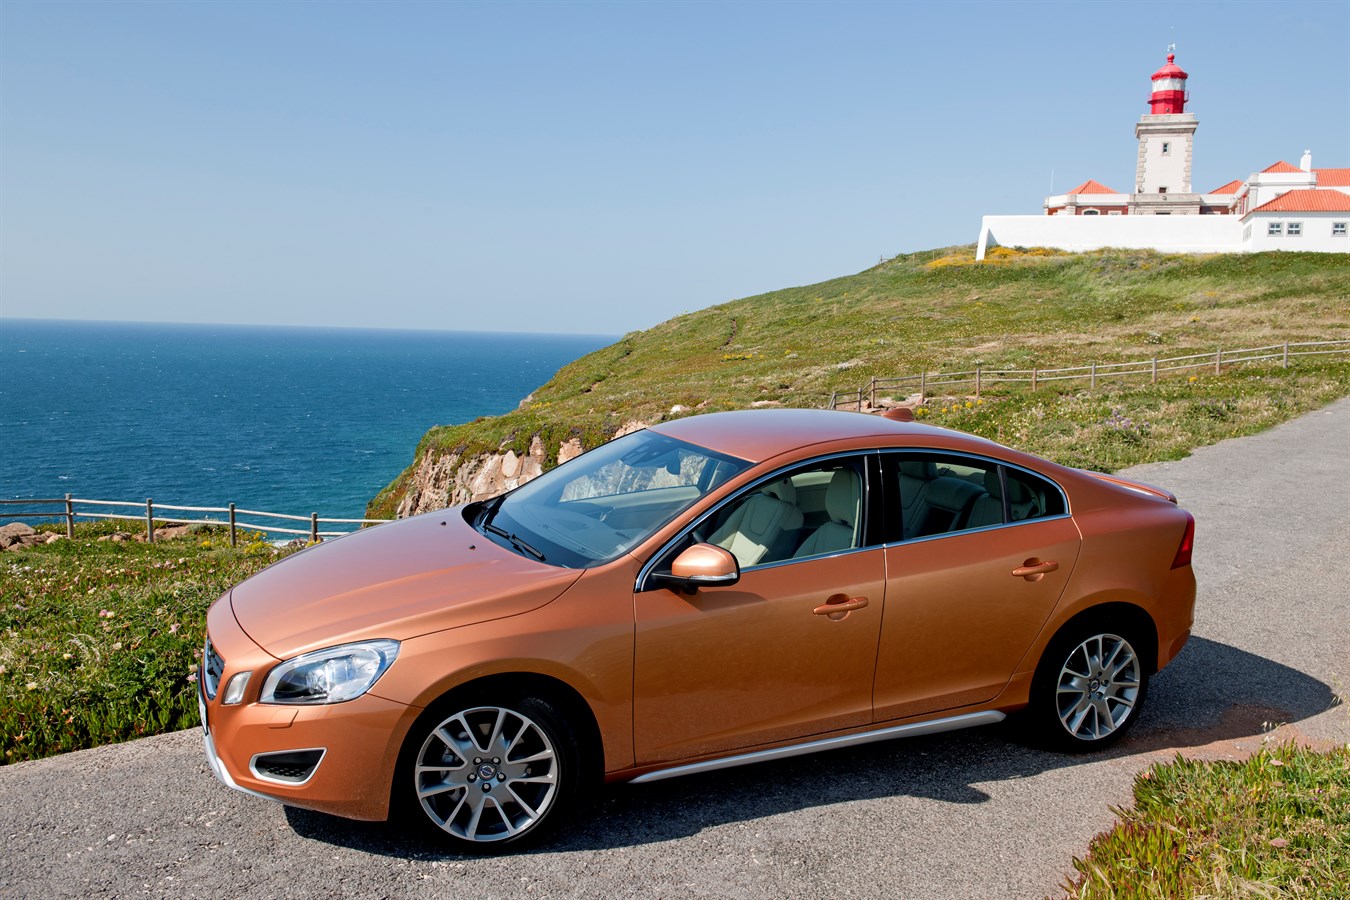 The all-new Volvo S60 on the road in the region of Sintra, Portugal